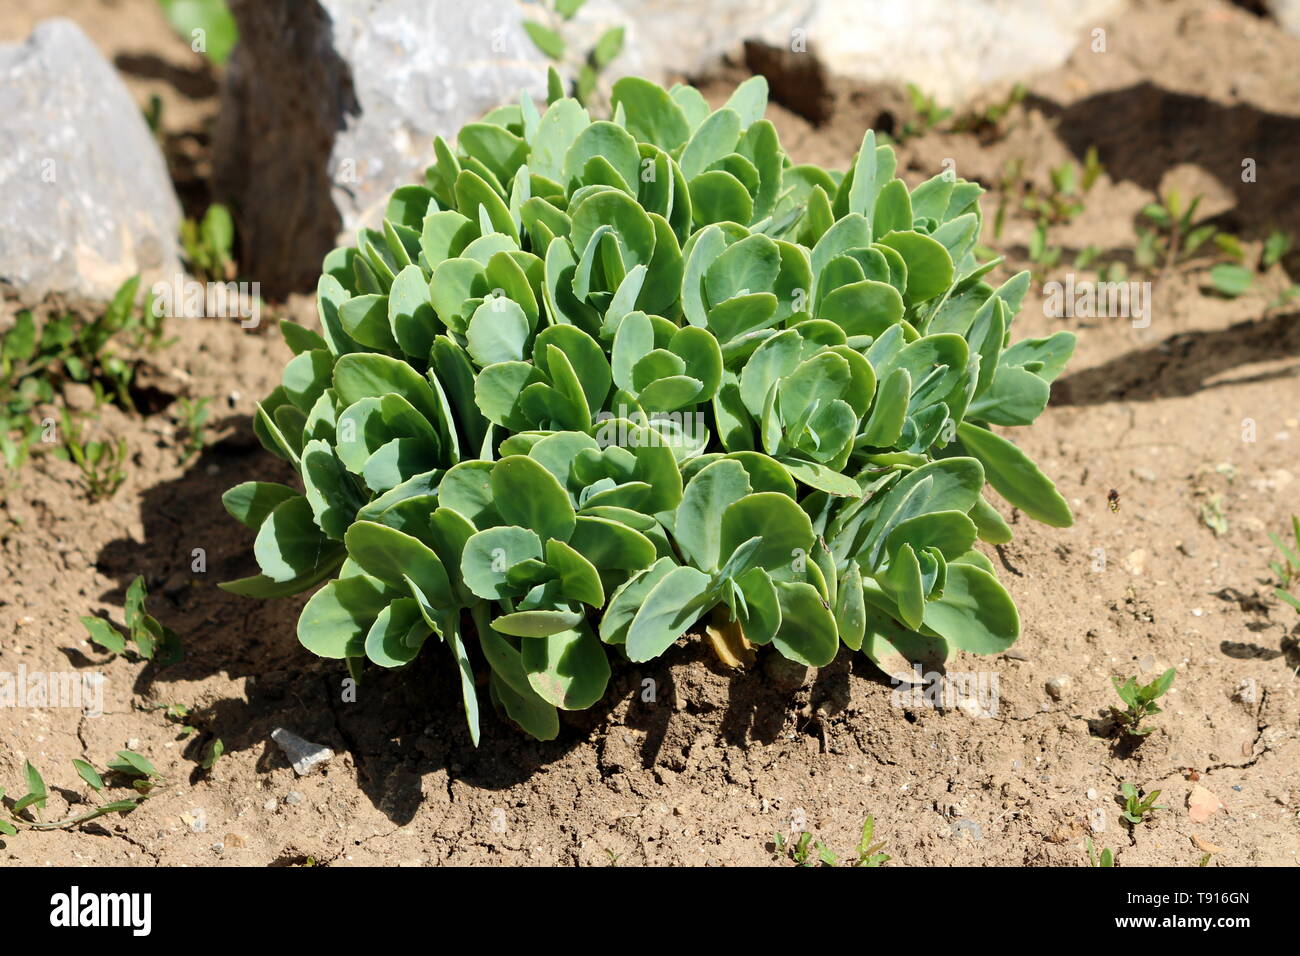 Sedum or Stonecrop hardy succulent ground cover perennial green plant with thick succulent leaves and fleshy stems planted in local garden Stock Photo